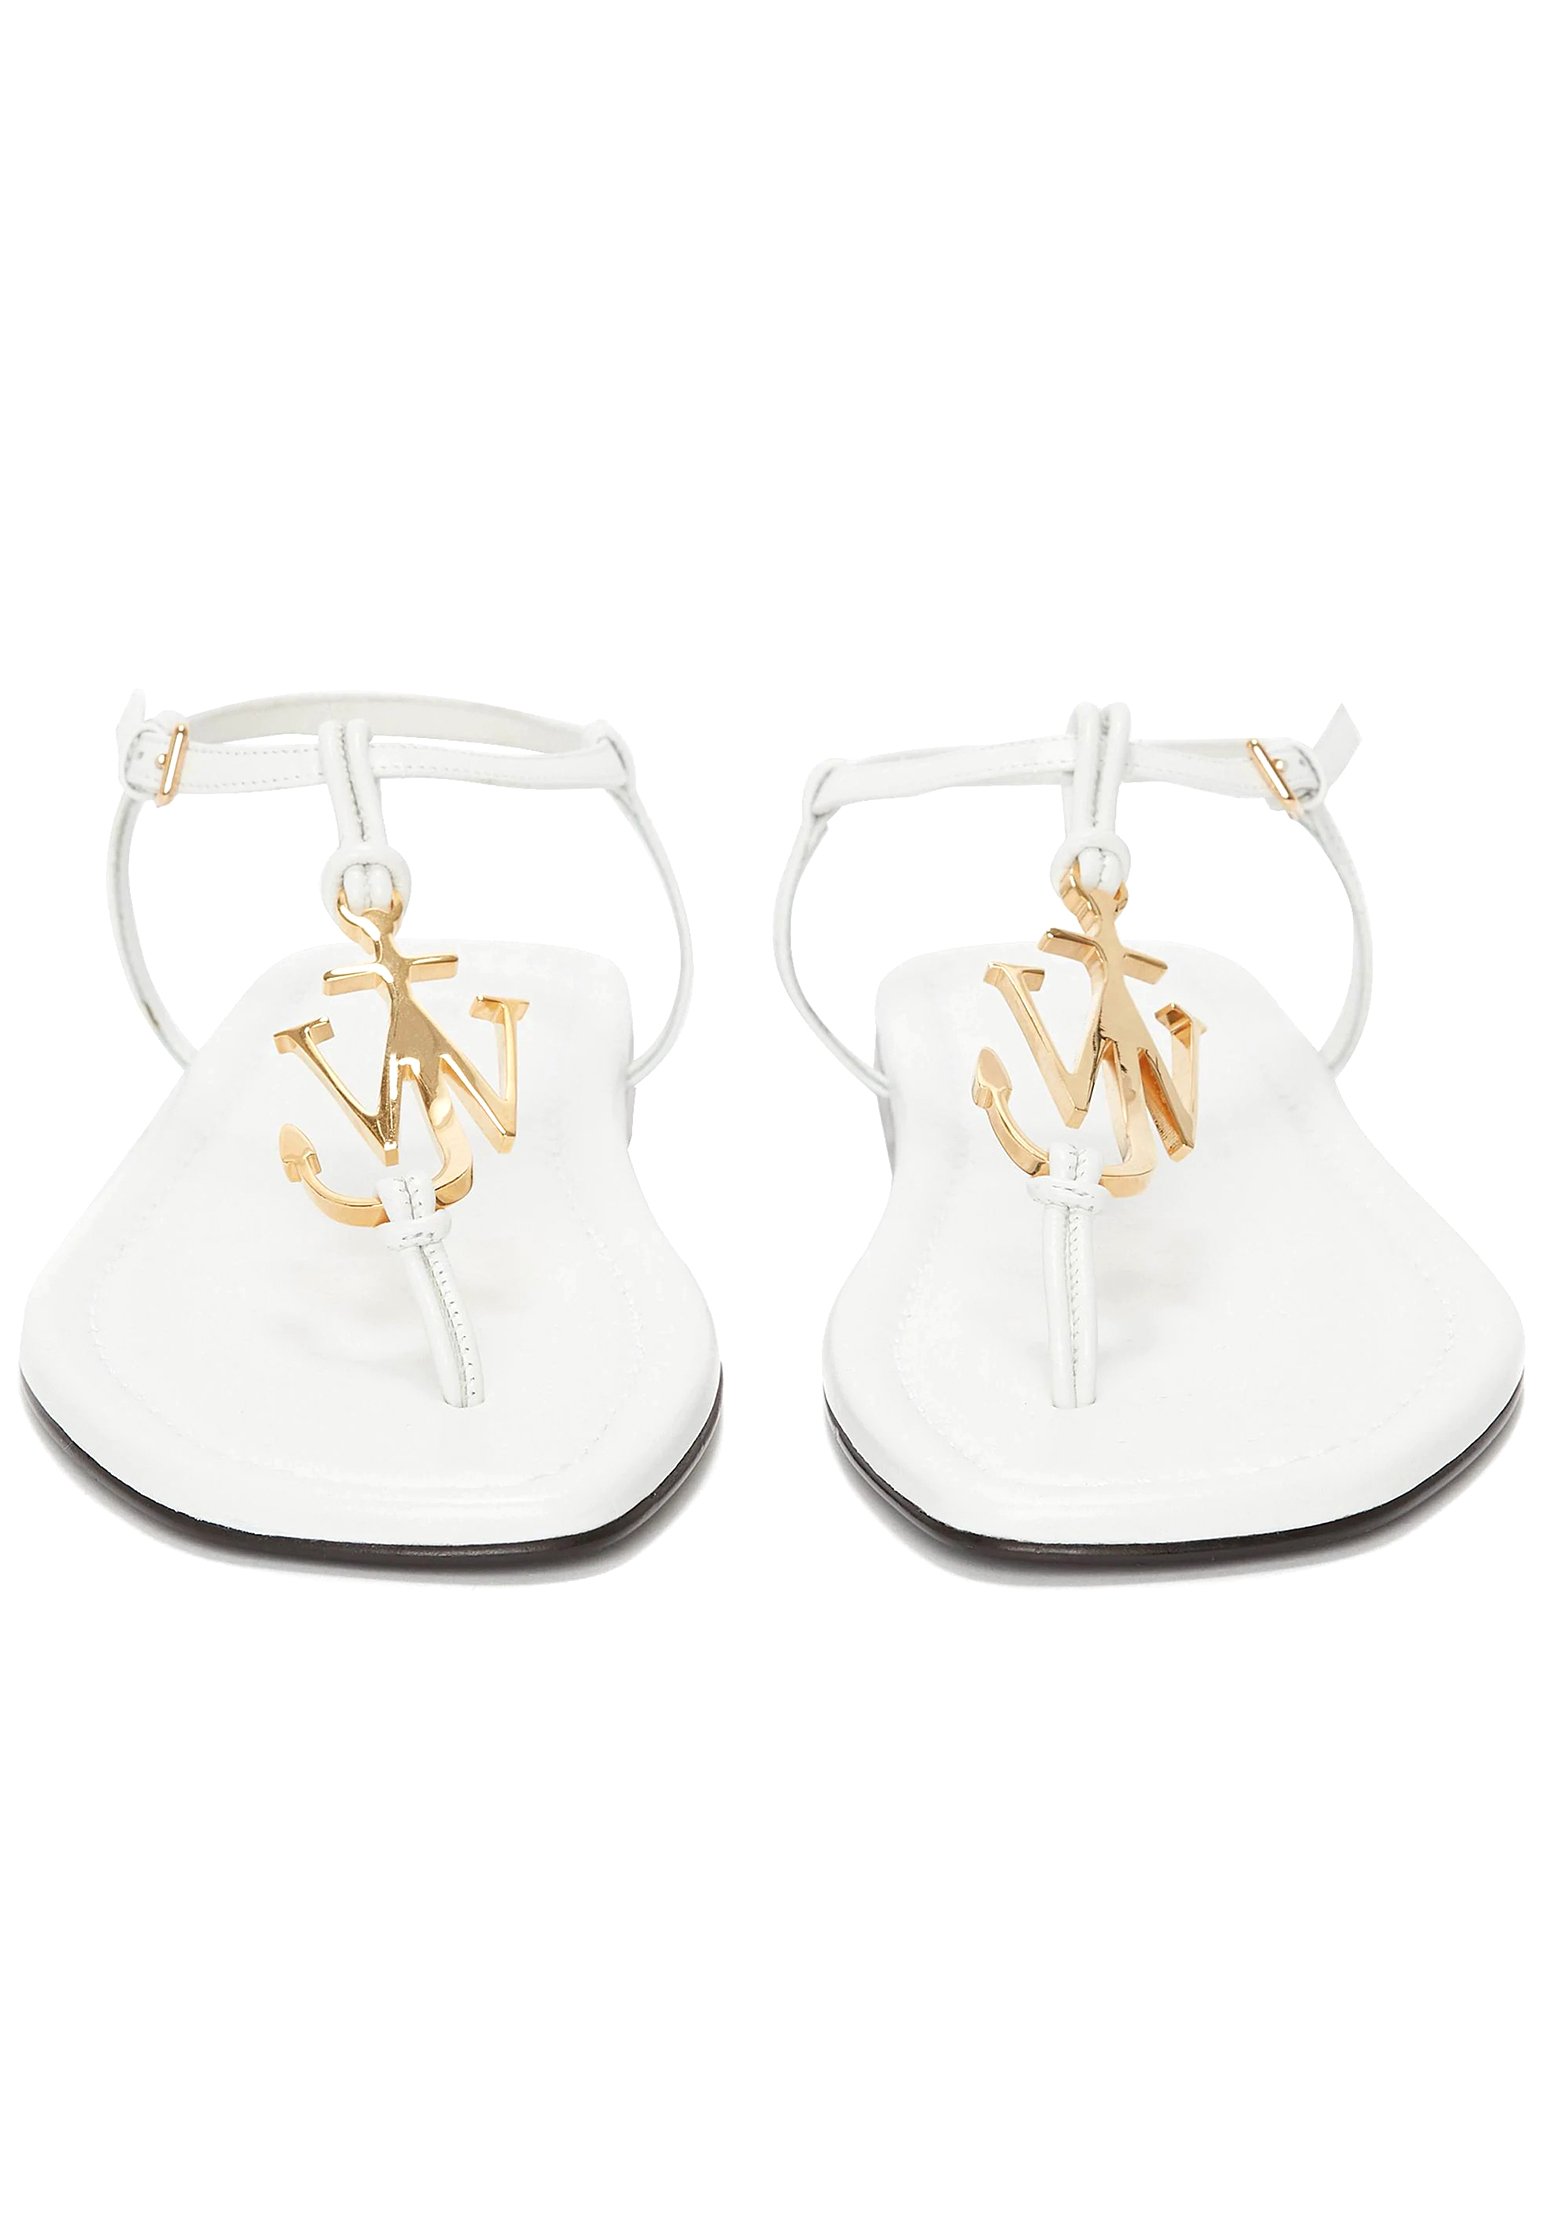 Sandals J.W. ANDERSON Color: white (Code: 736) in online store Allure